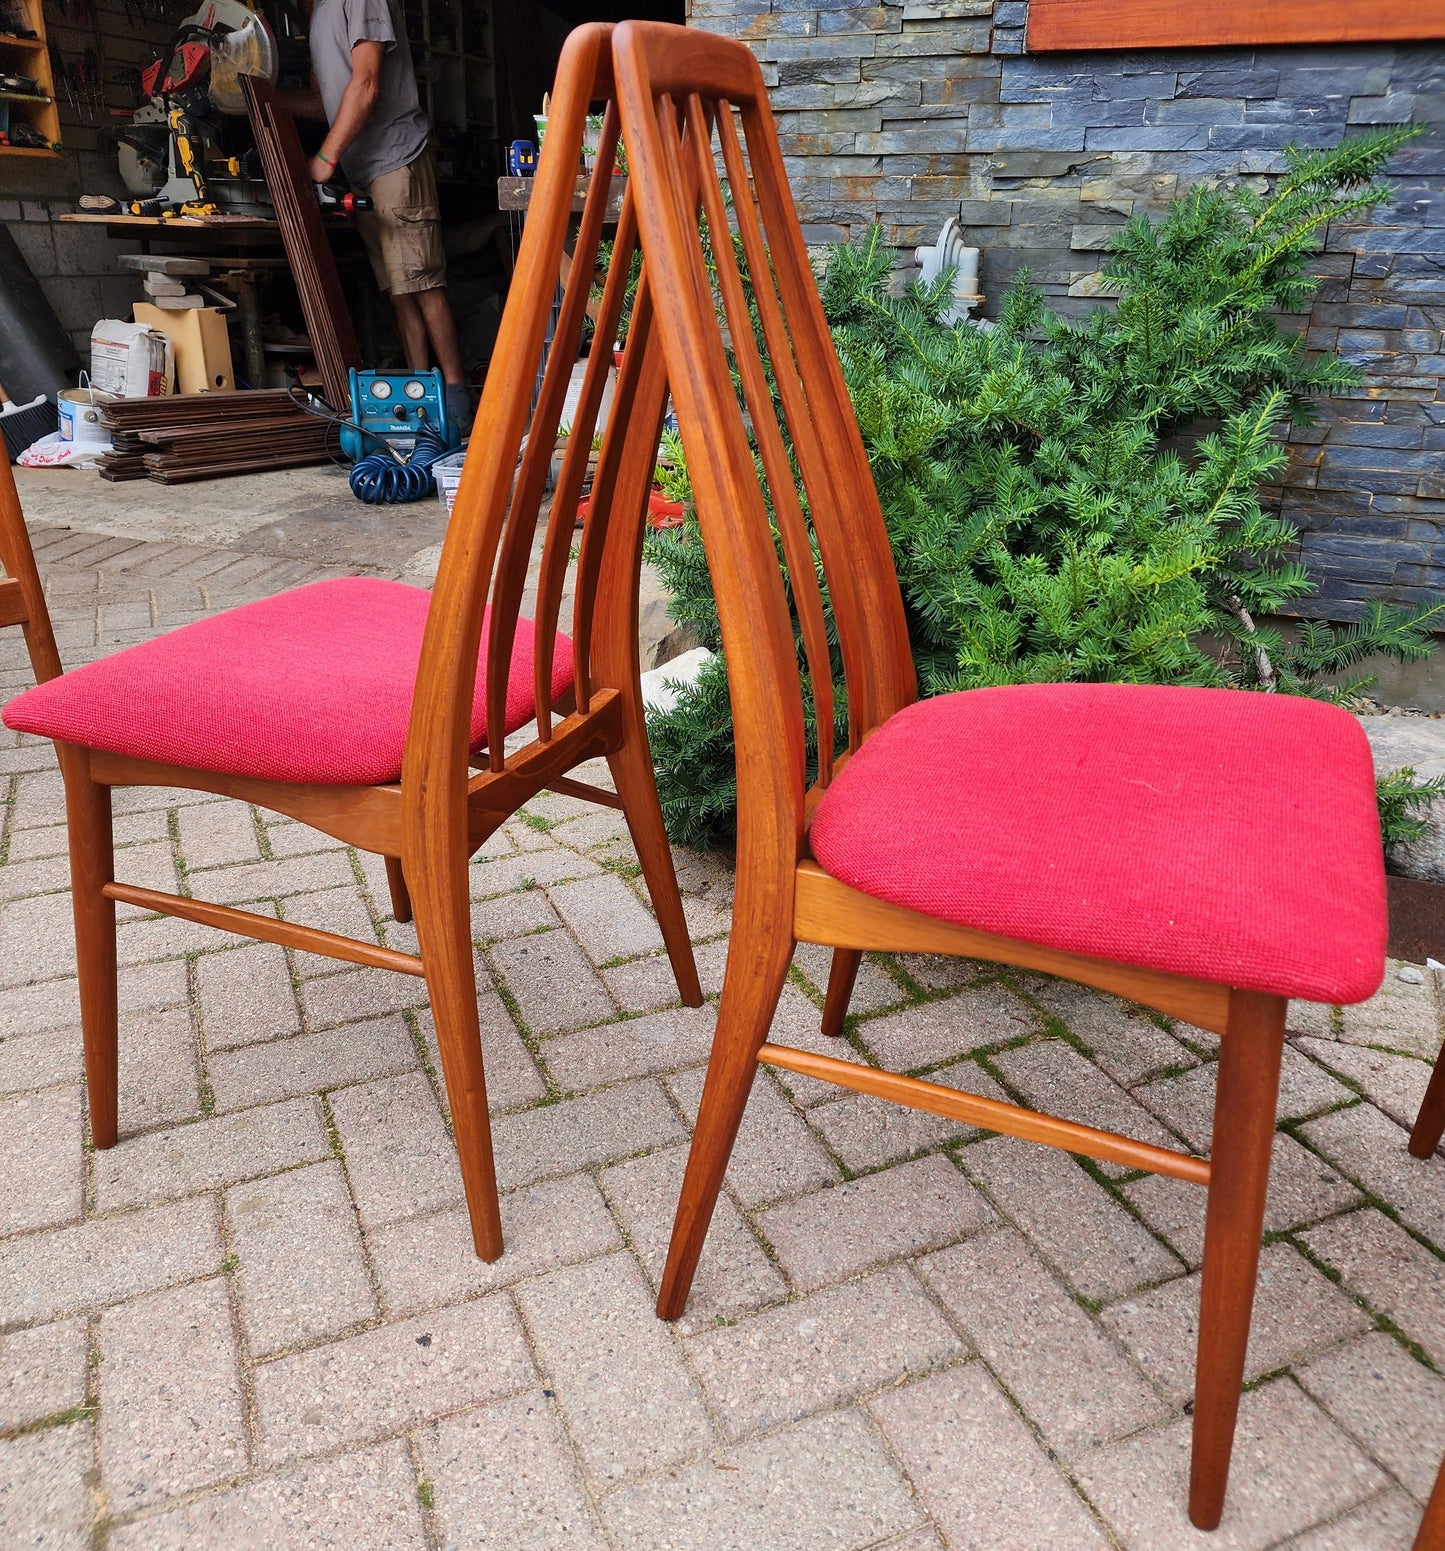 6 RESTORED Danish Mid Century Modern Teak Dining Chairs by Niels Kofoed, model Eva (12 chairs available)